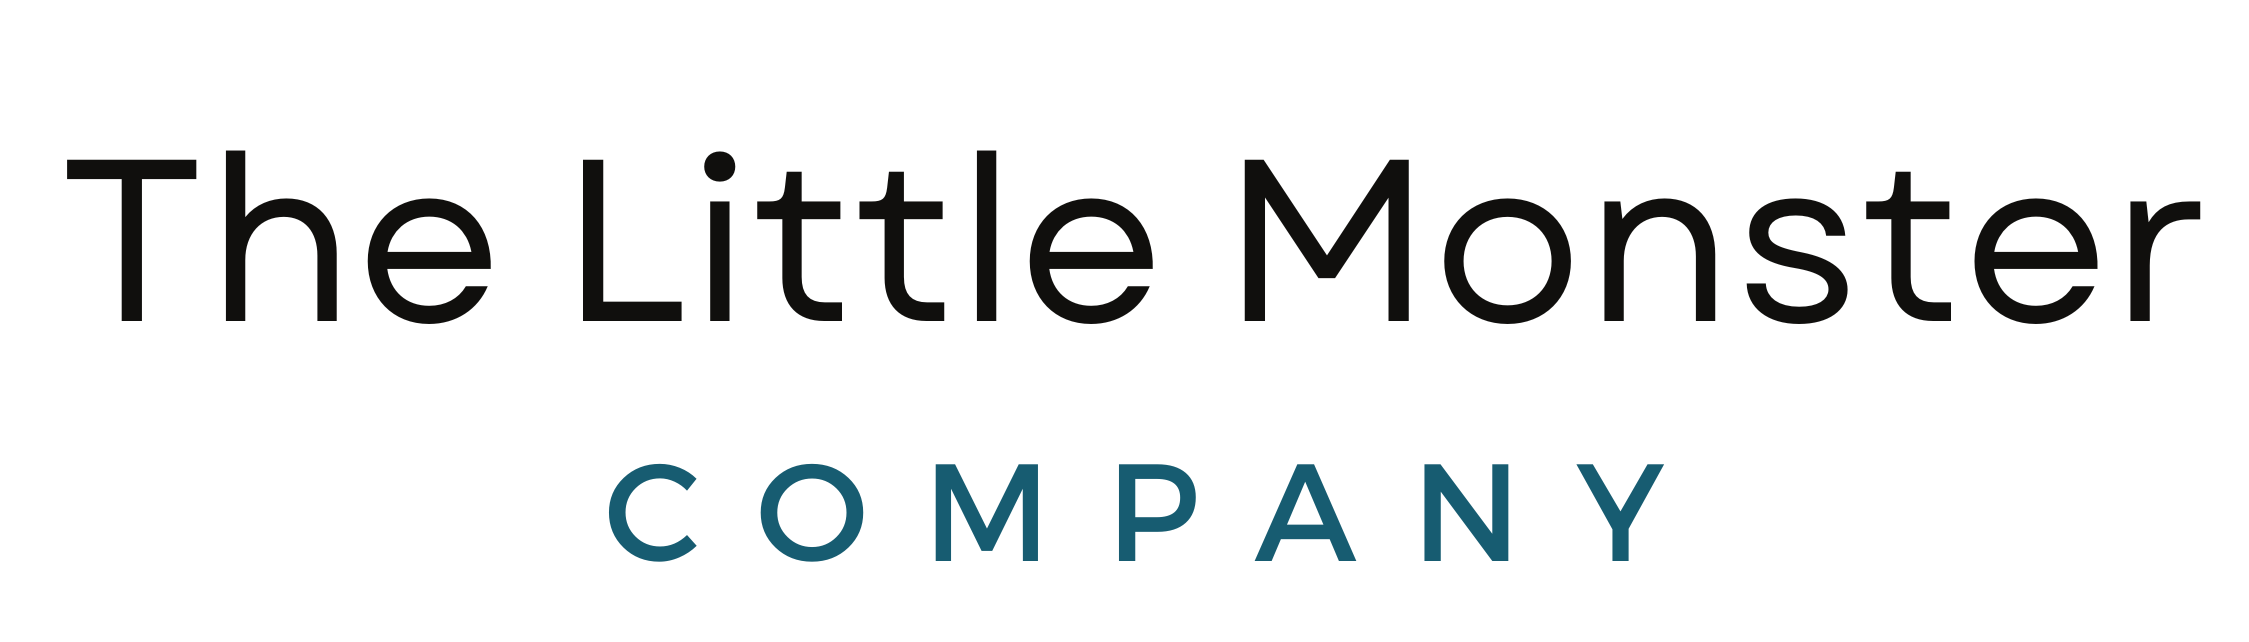 The Little Monster Company